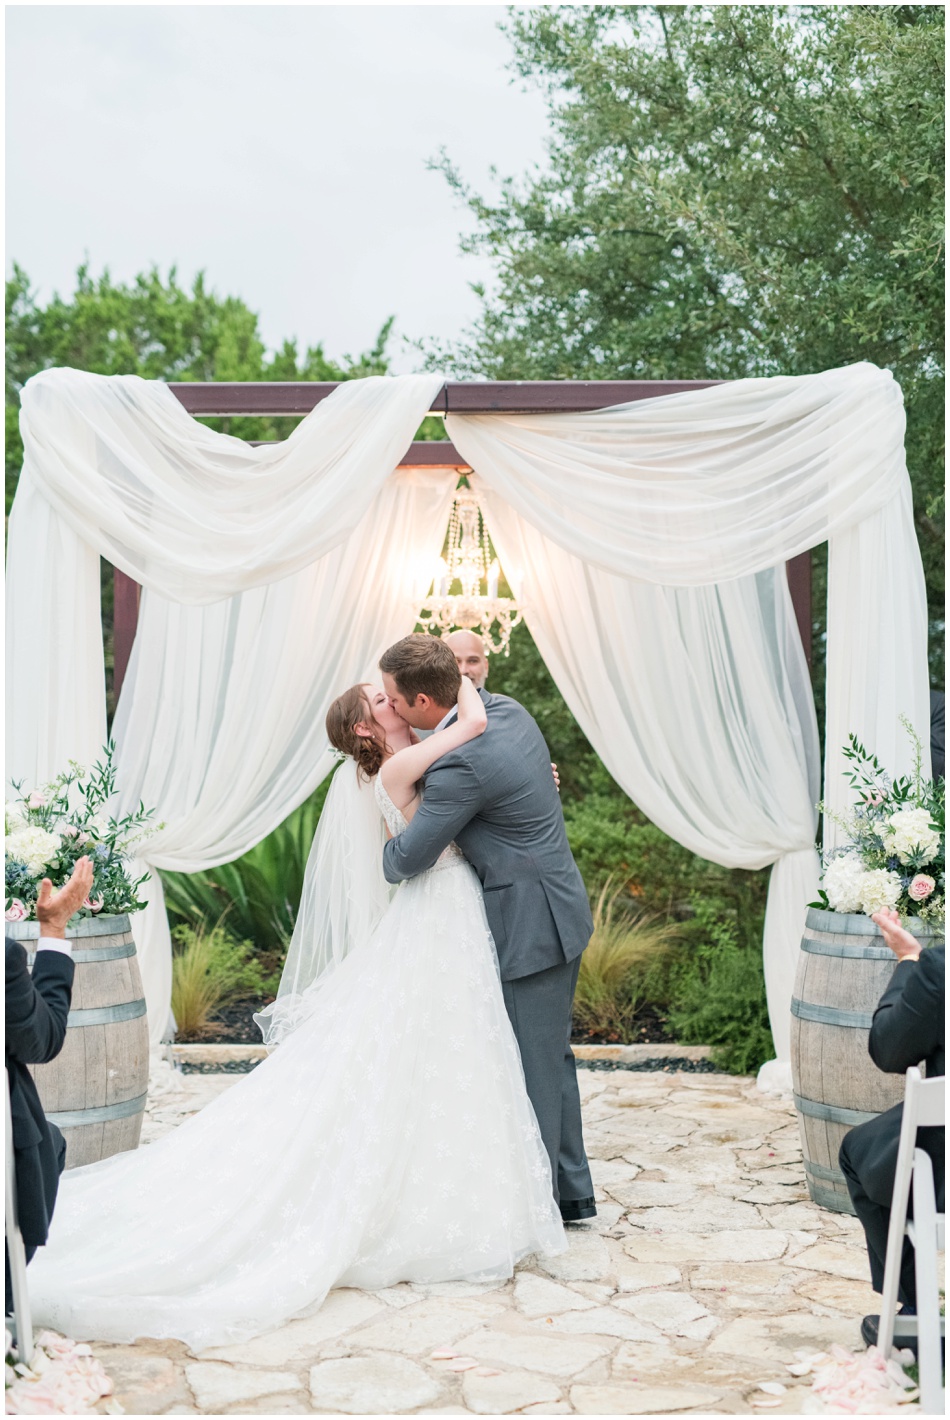 First Kiss at The Terrace Club wedding ceremony